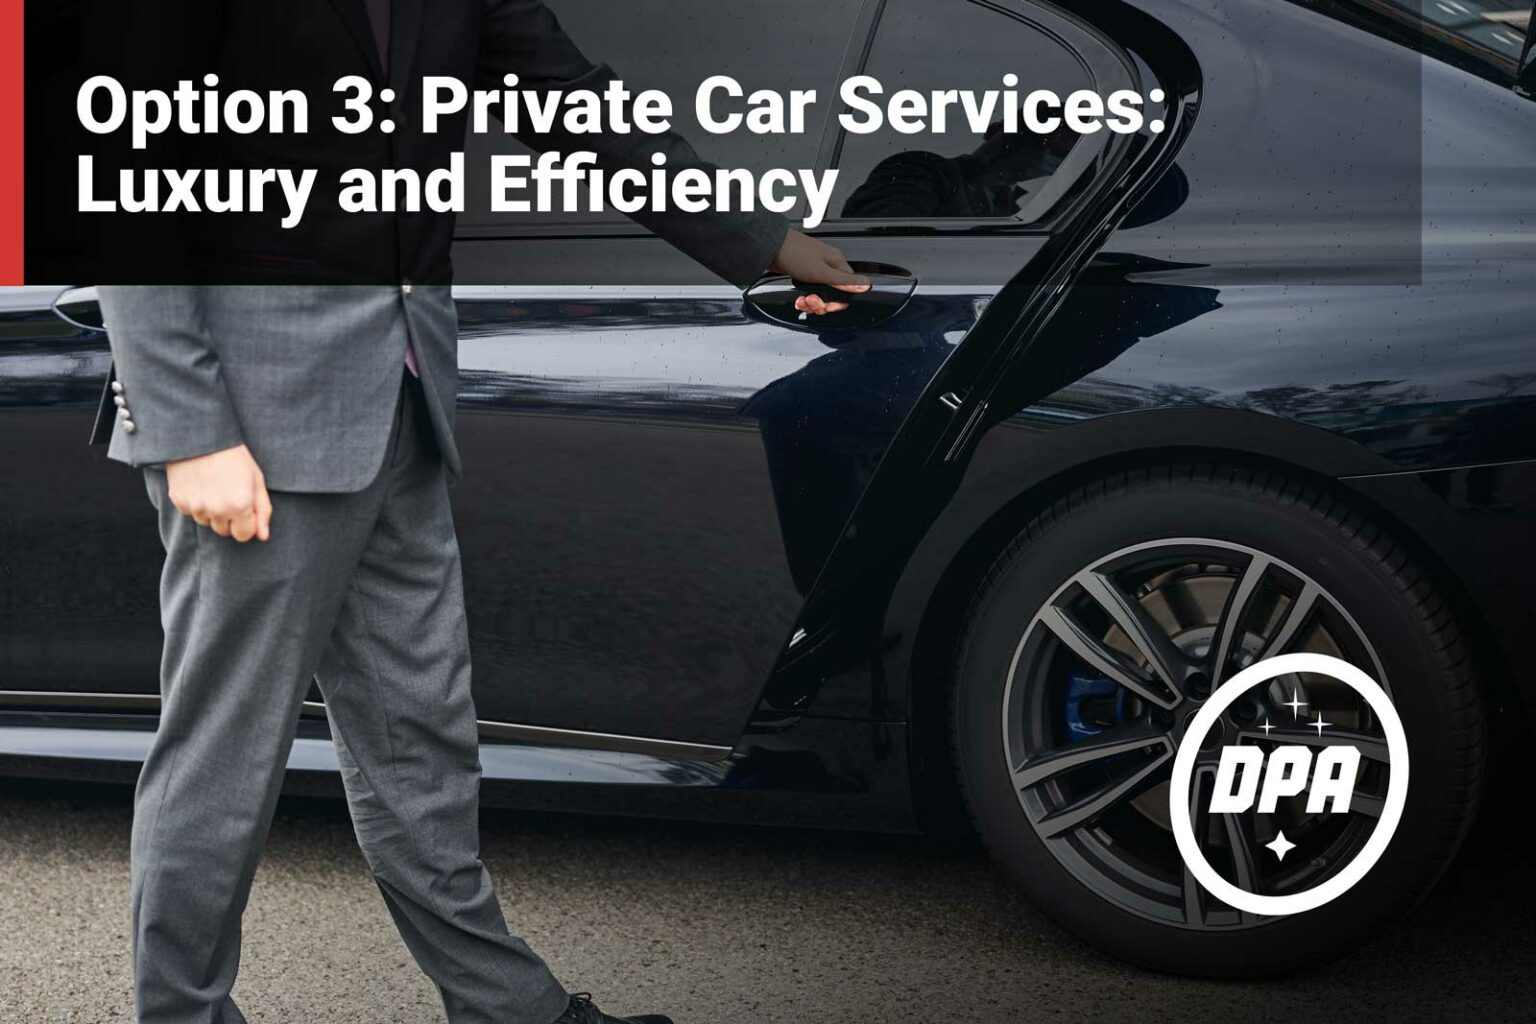 Option 3: Private Car Services: Luxury and Efficiency